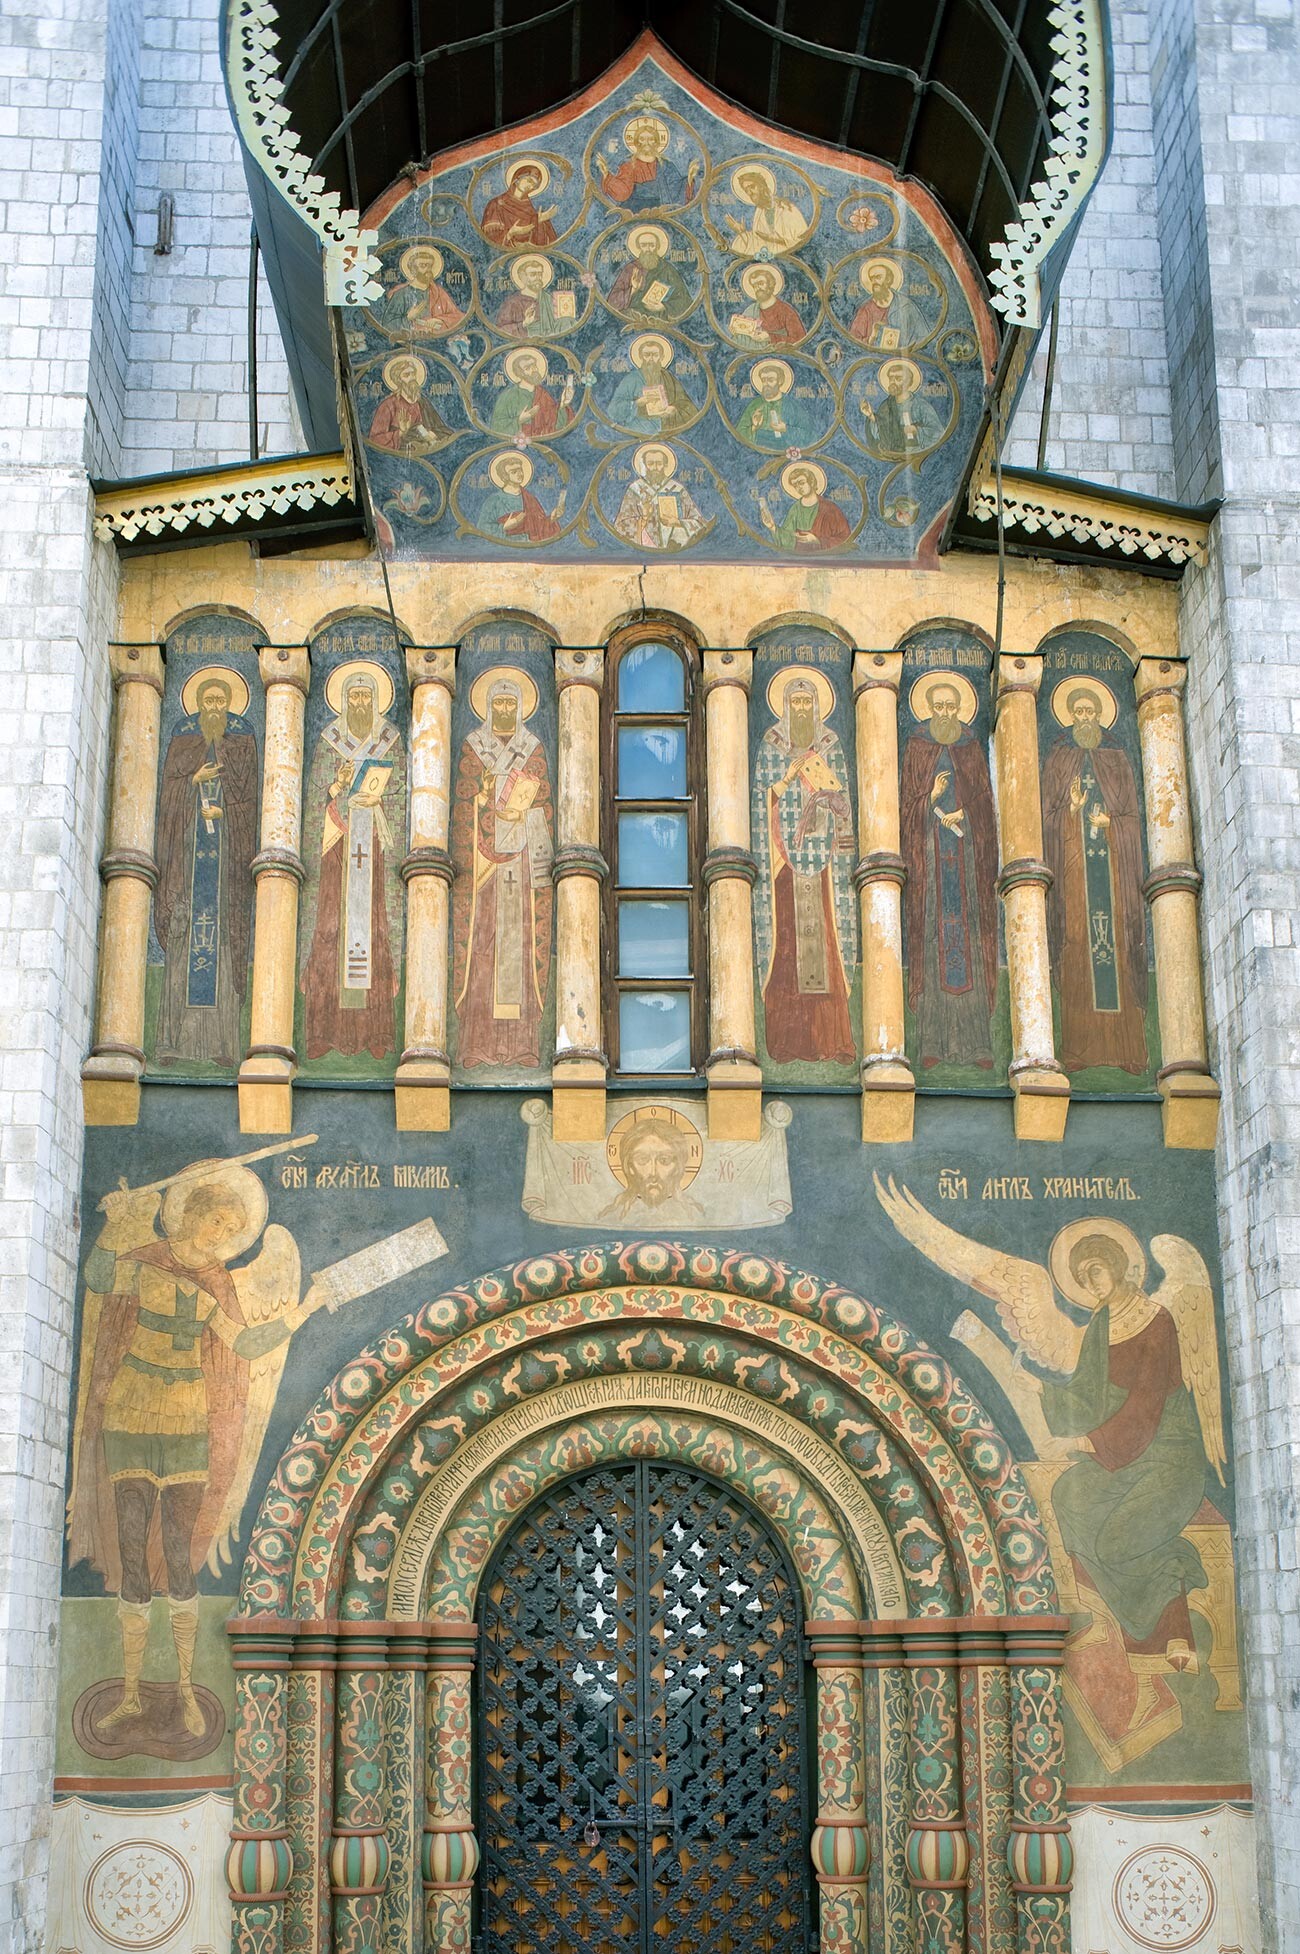 Dormition Cathedral. North facade, portal with blind arcade & images of Church Fathers. June 17, 2012